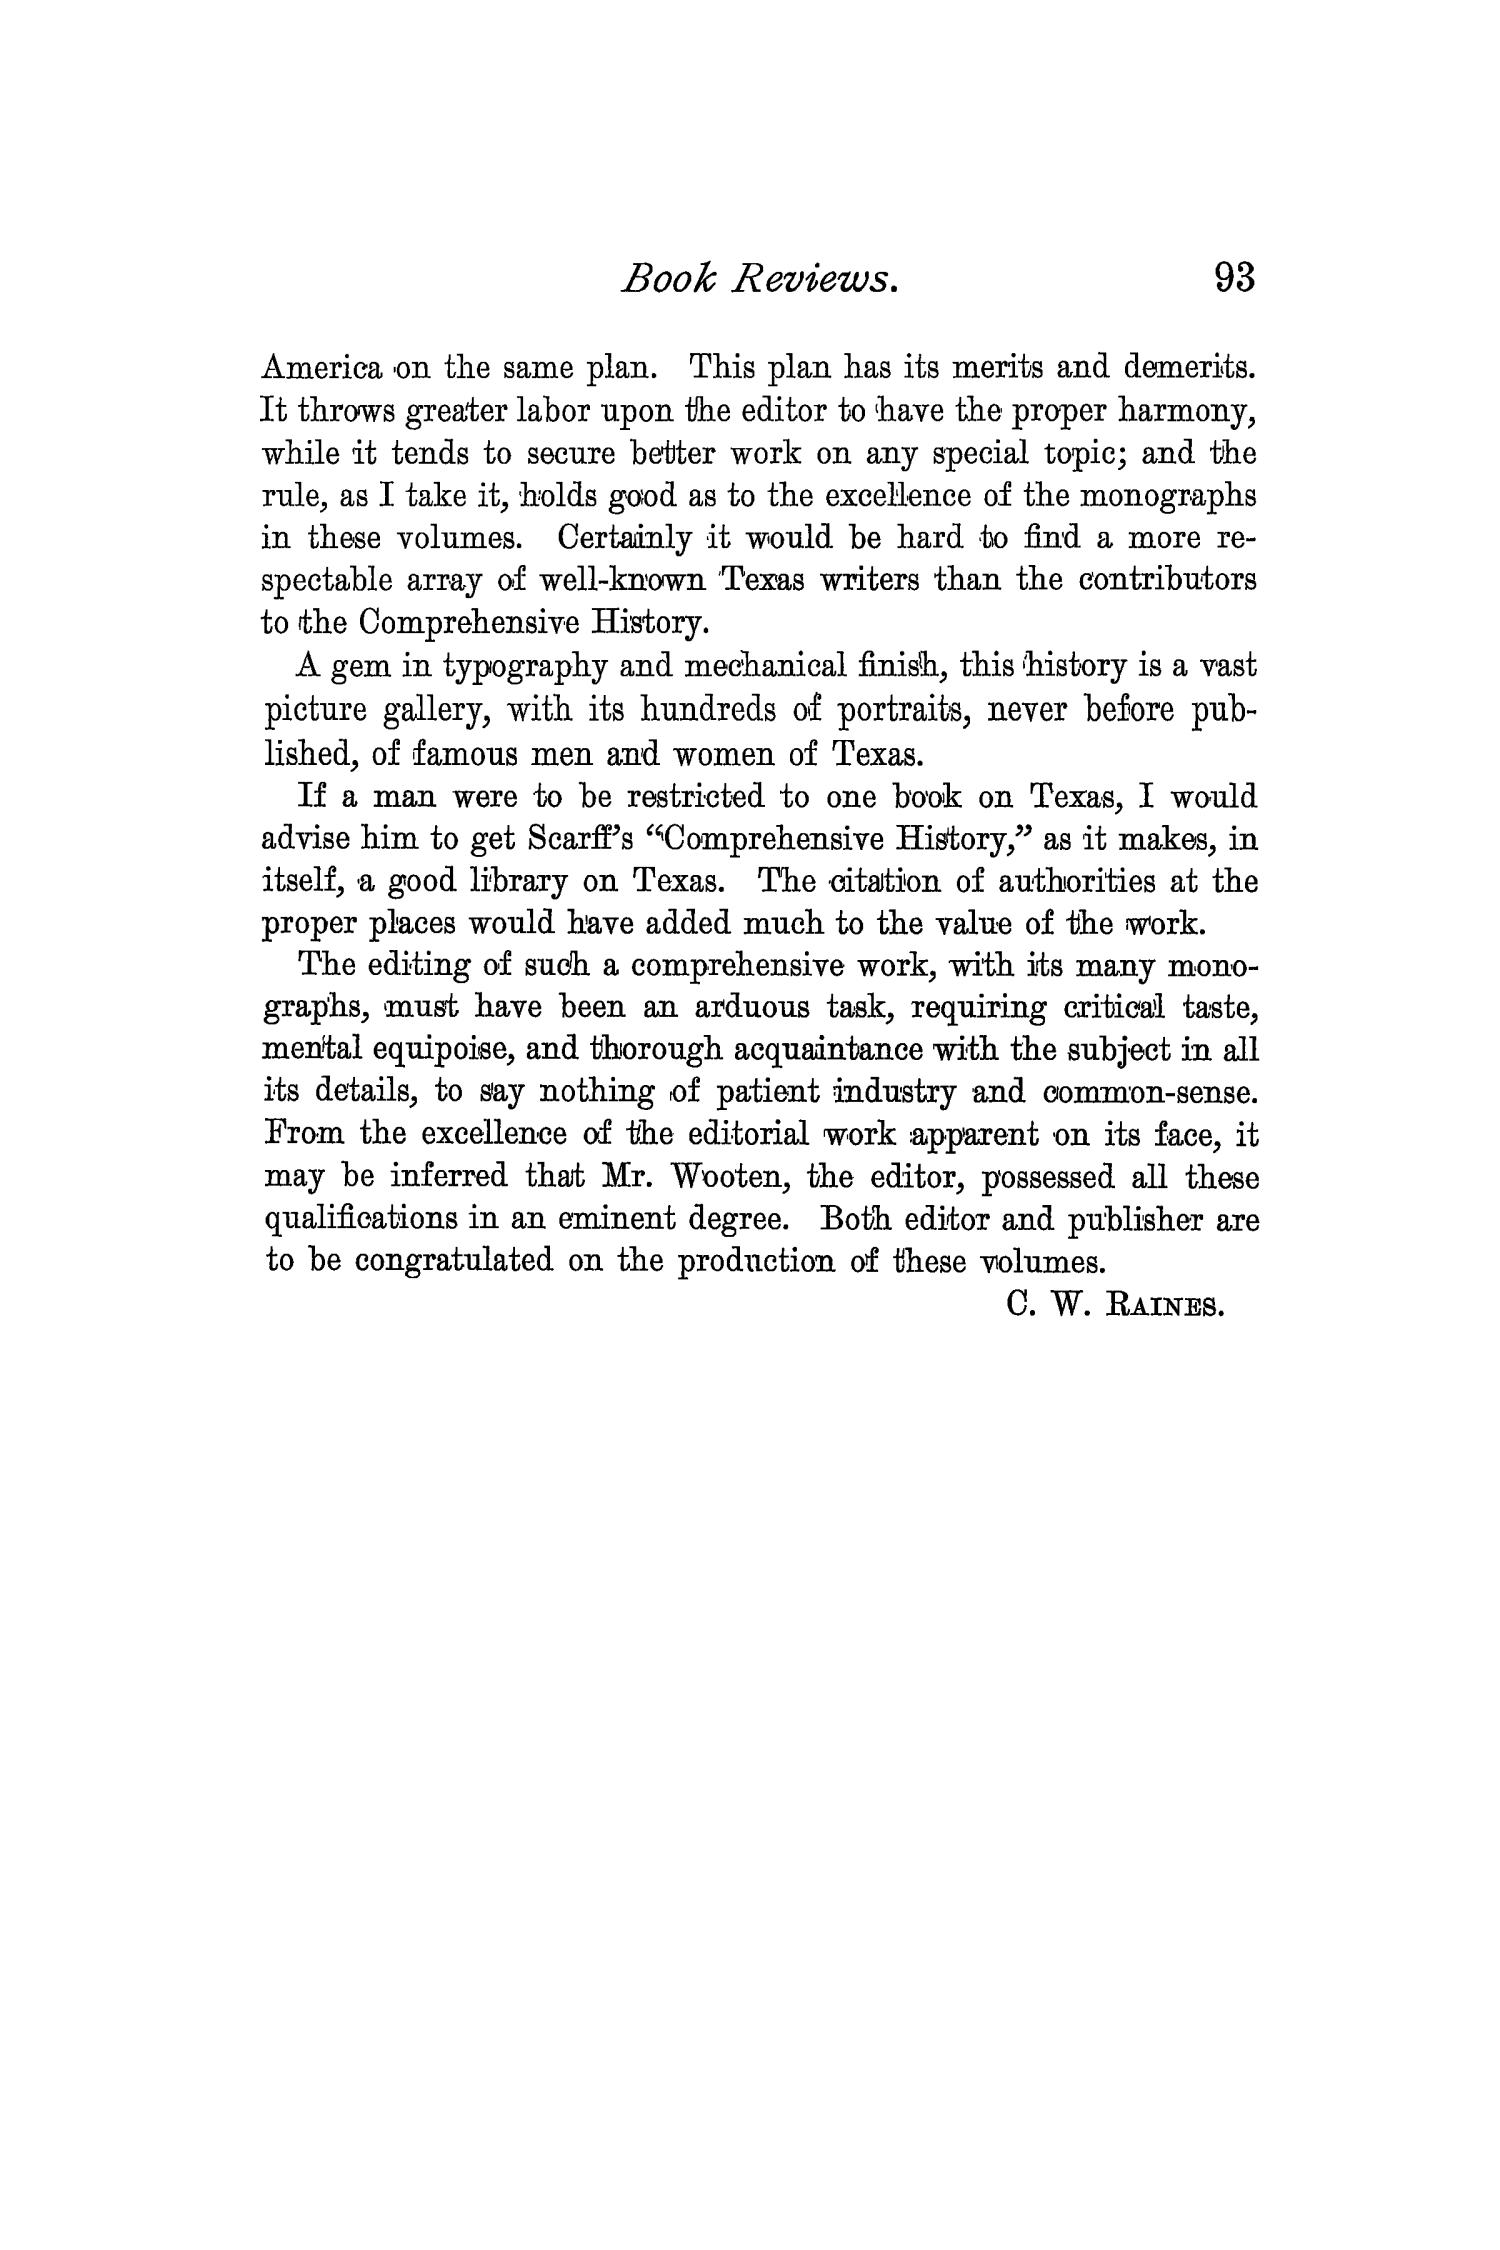 The Quarterly of the Texas State Historical Association, Volume 2, July 1898 - April, 1899
                                                
                                                    93
                                                